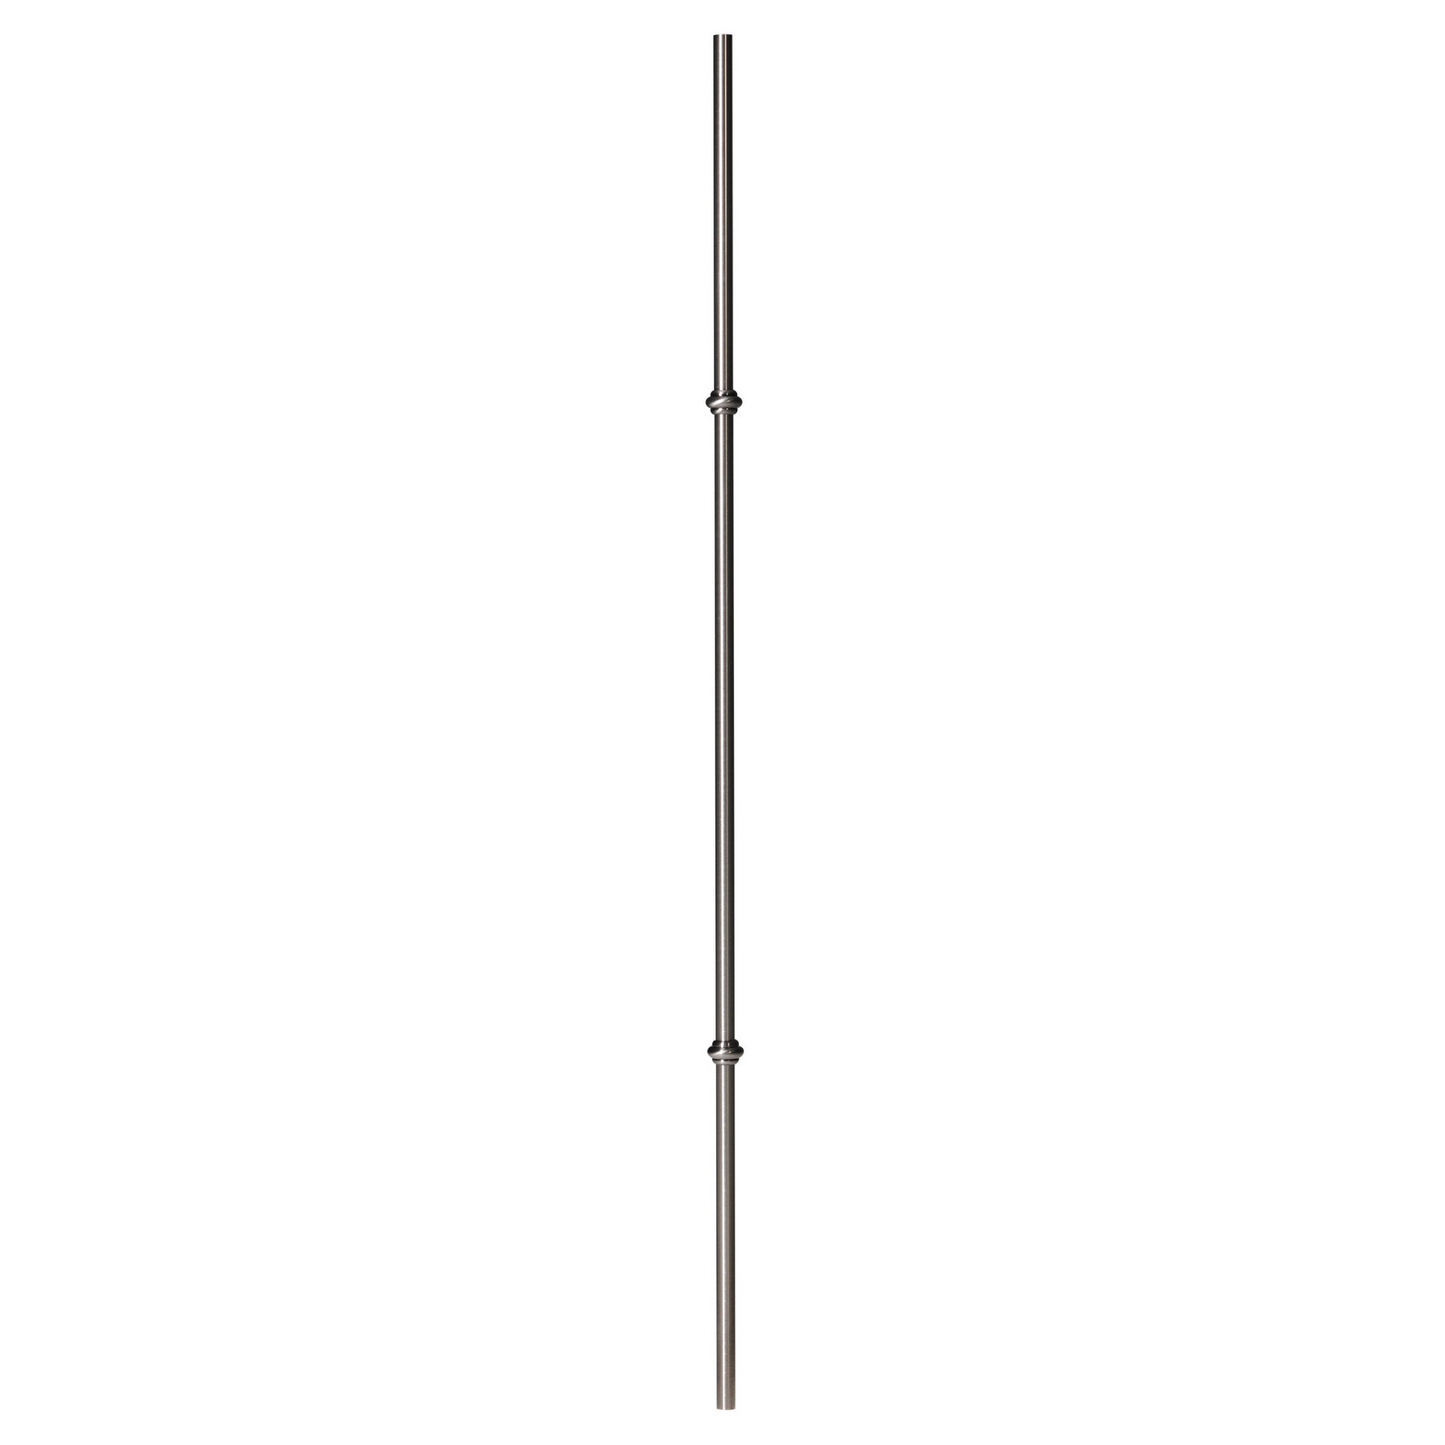 Fusion Brushed Nickel 2 Knuckle Baluster